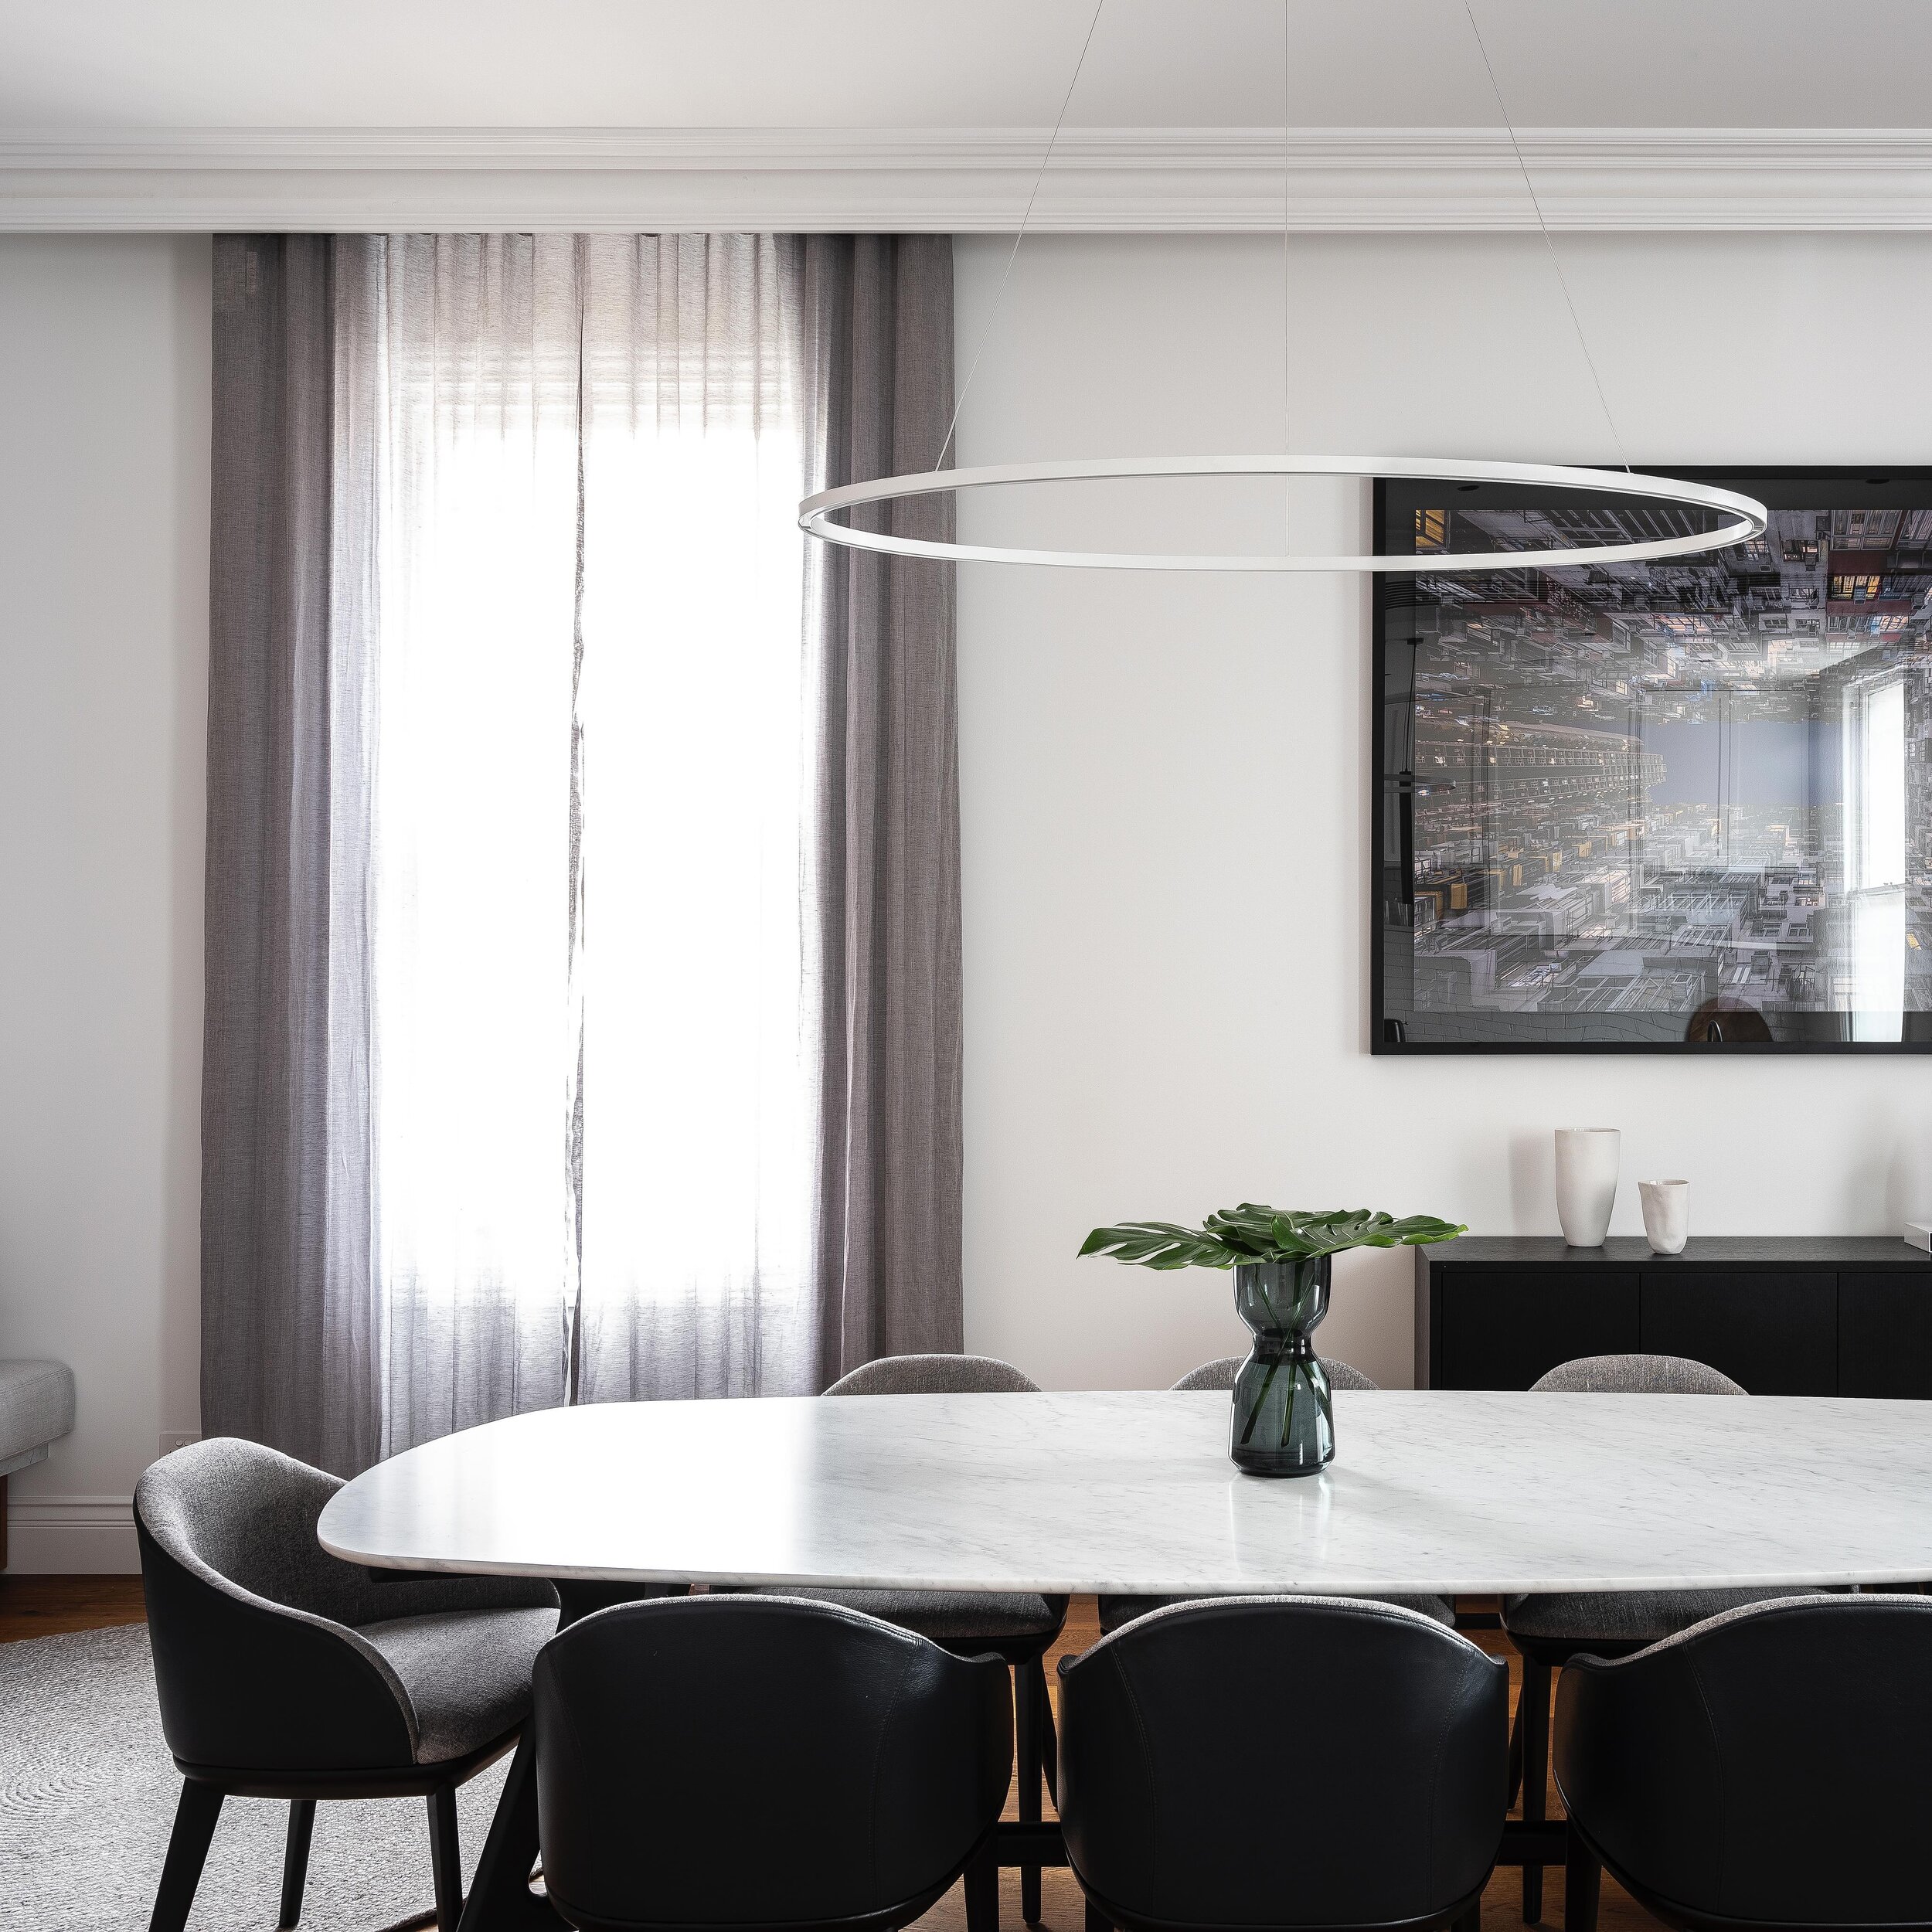 RILEY &bull; We specified a minimal modern pendant to allow our luxurious furniture selection to shine through. Sometime less is more! #InnovateInteriors